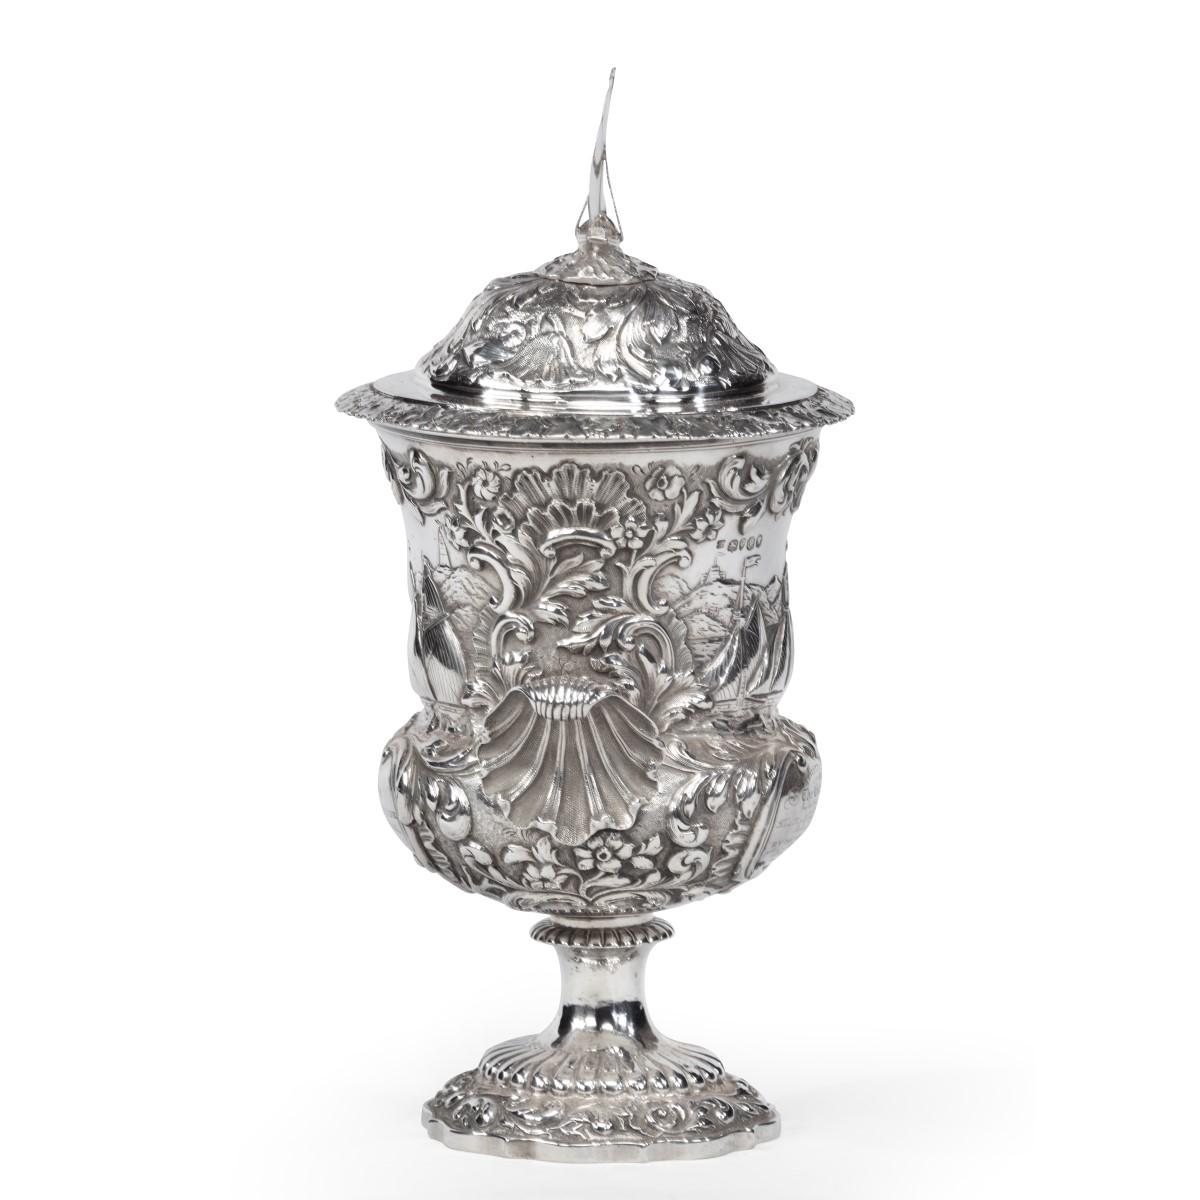 A silver and silver-gilt sailing regatta trophy by Samuel Hayne and Dudley Cater, 1838